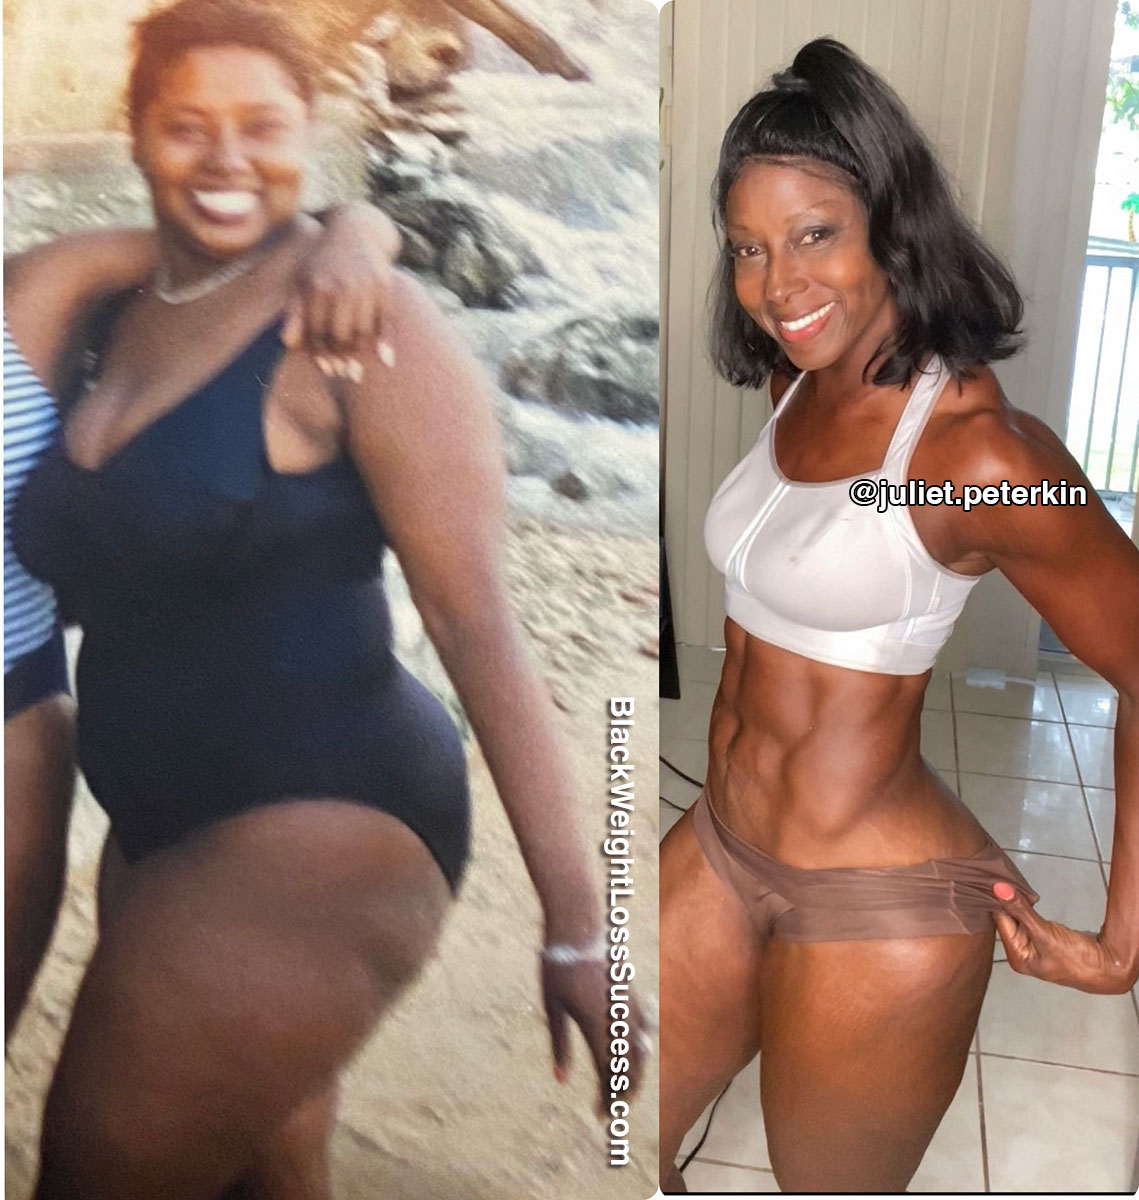 Juliet before and after weight loss